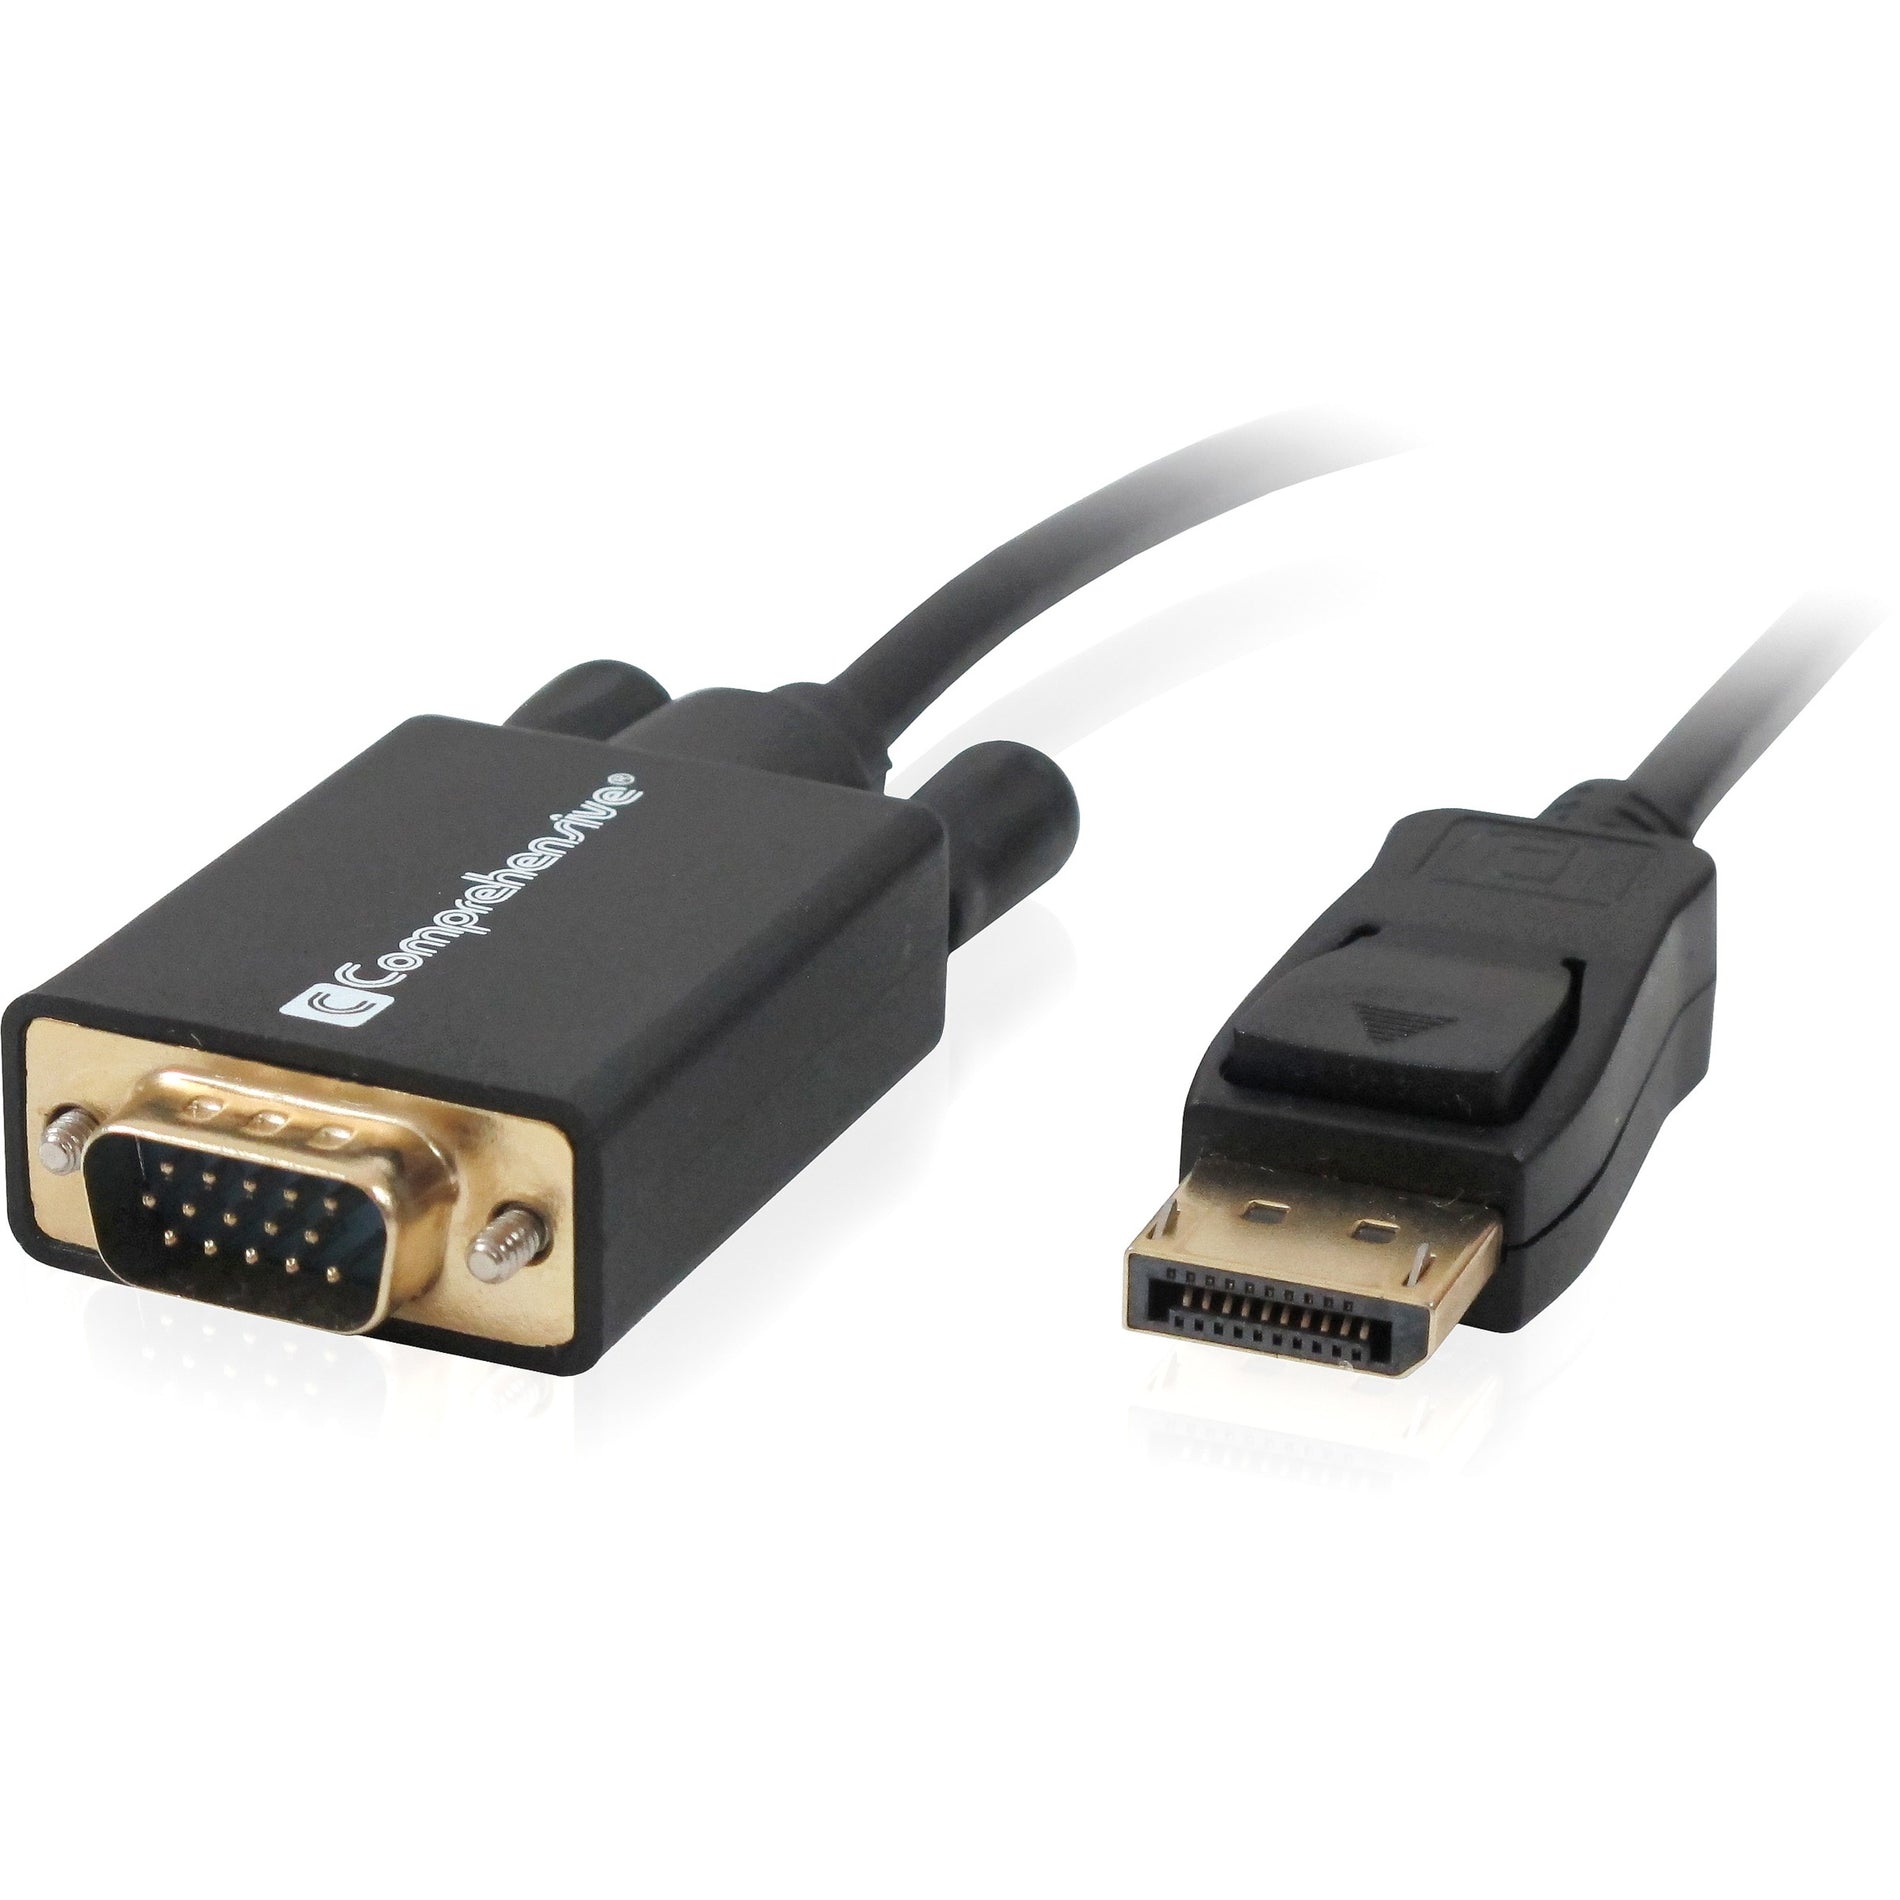 Comprehensive CCN-DP2VGA6 Displayport to VGA Converter Cable - 6ft, Active, 1920 x 1200 Supported Resolution